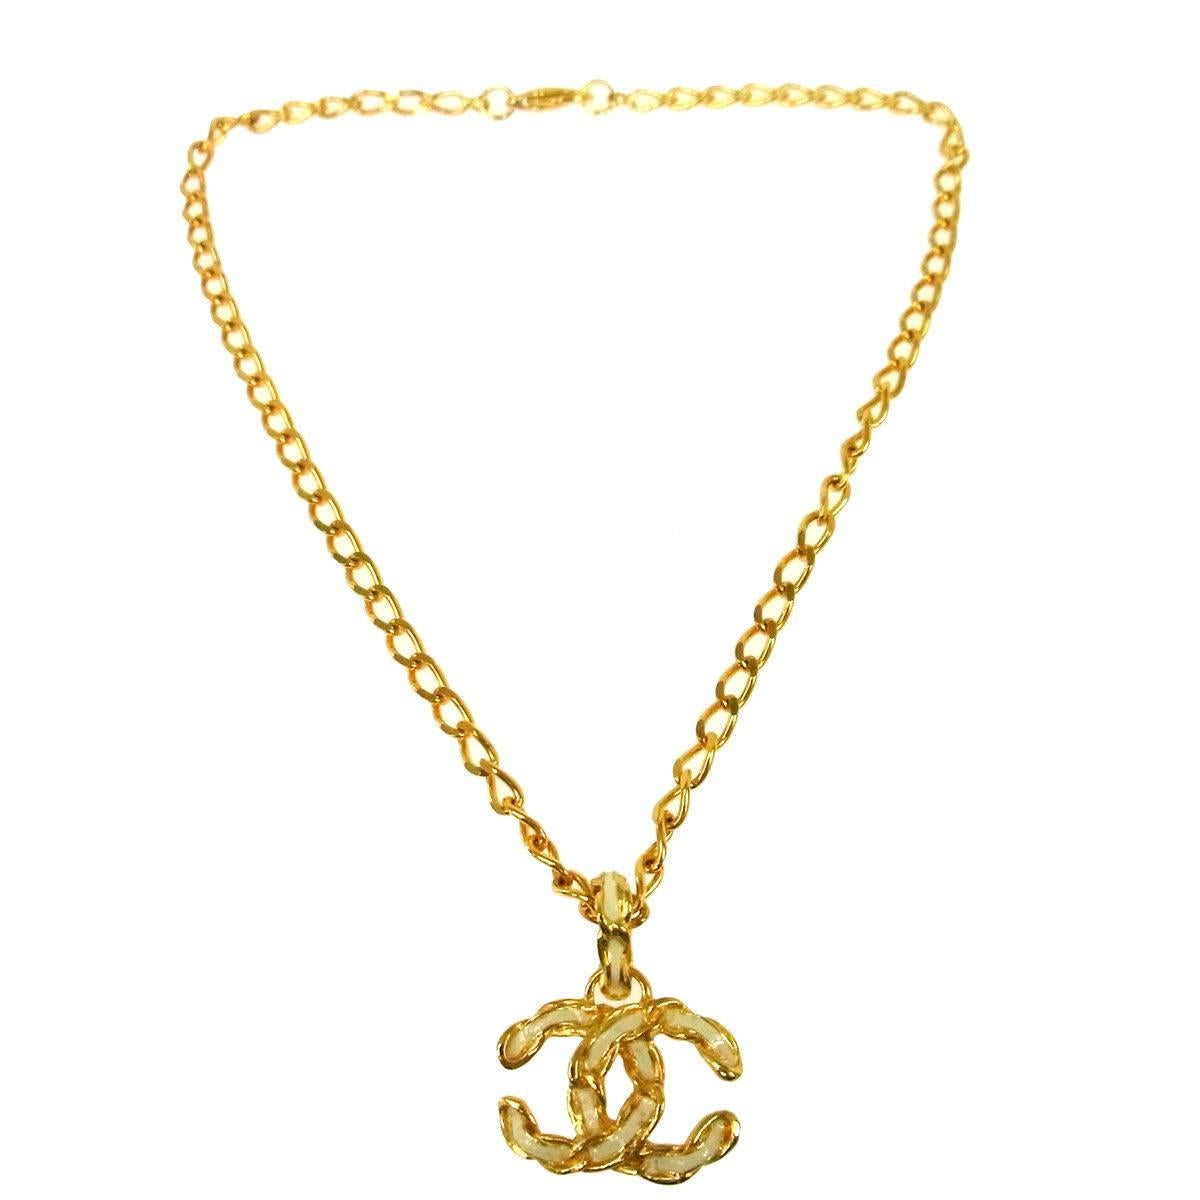 Chanel Textured Gold Chain Link White Enamel Charm Evening Necklace in Box